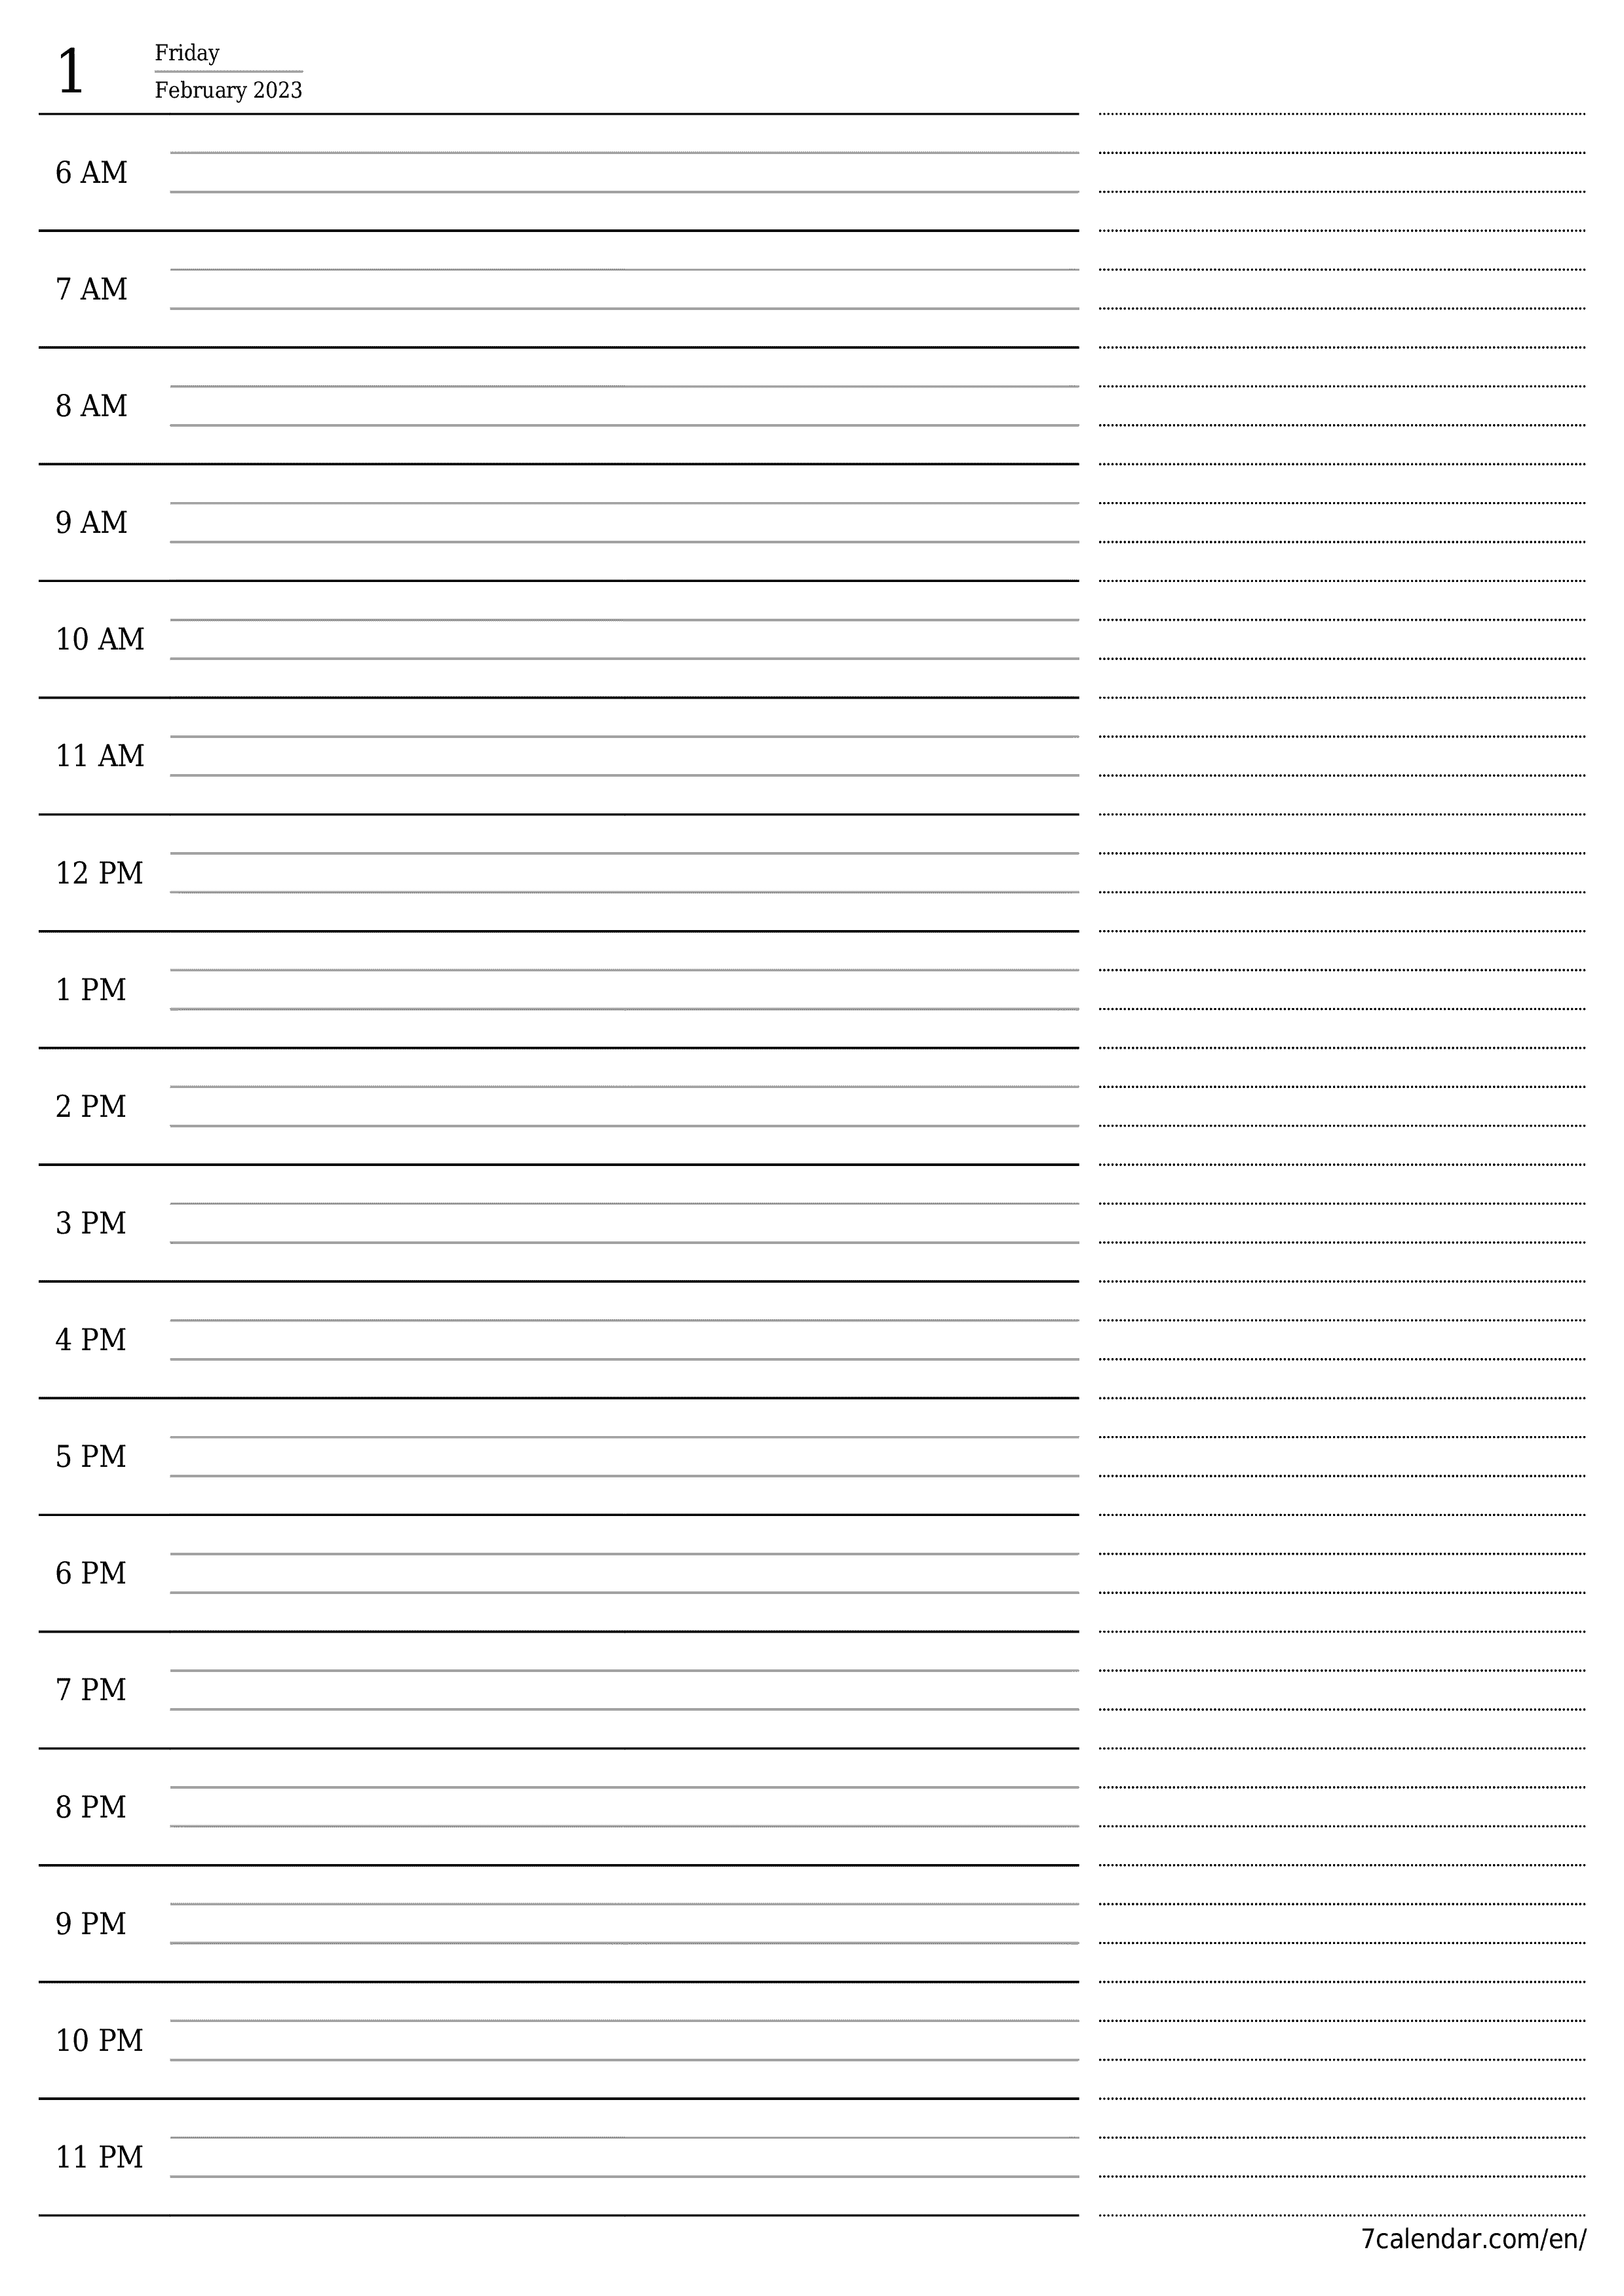 Blank daily calendar planner for day February 2023 with notes, save and print to PDF PNG English - 7calendar.com